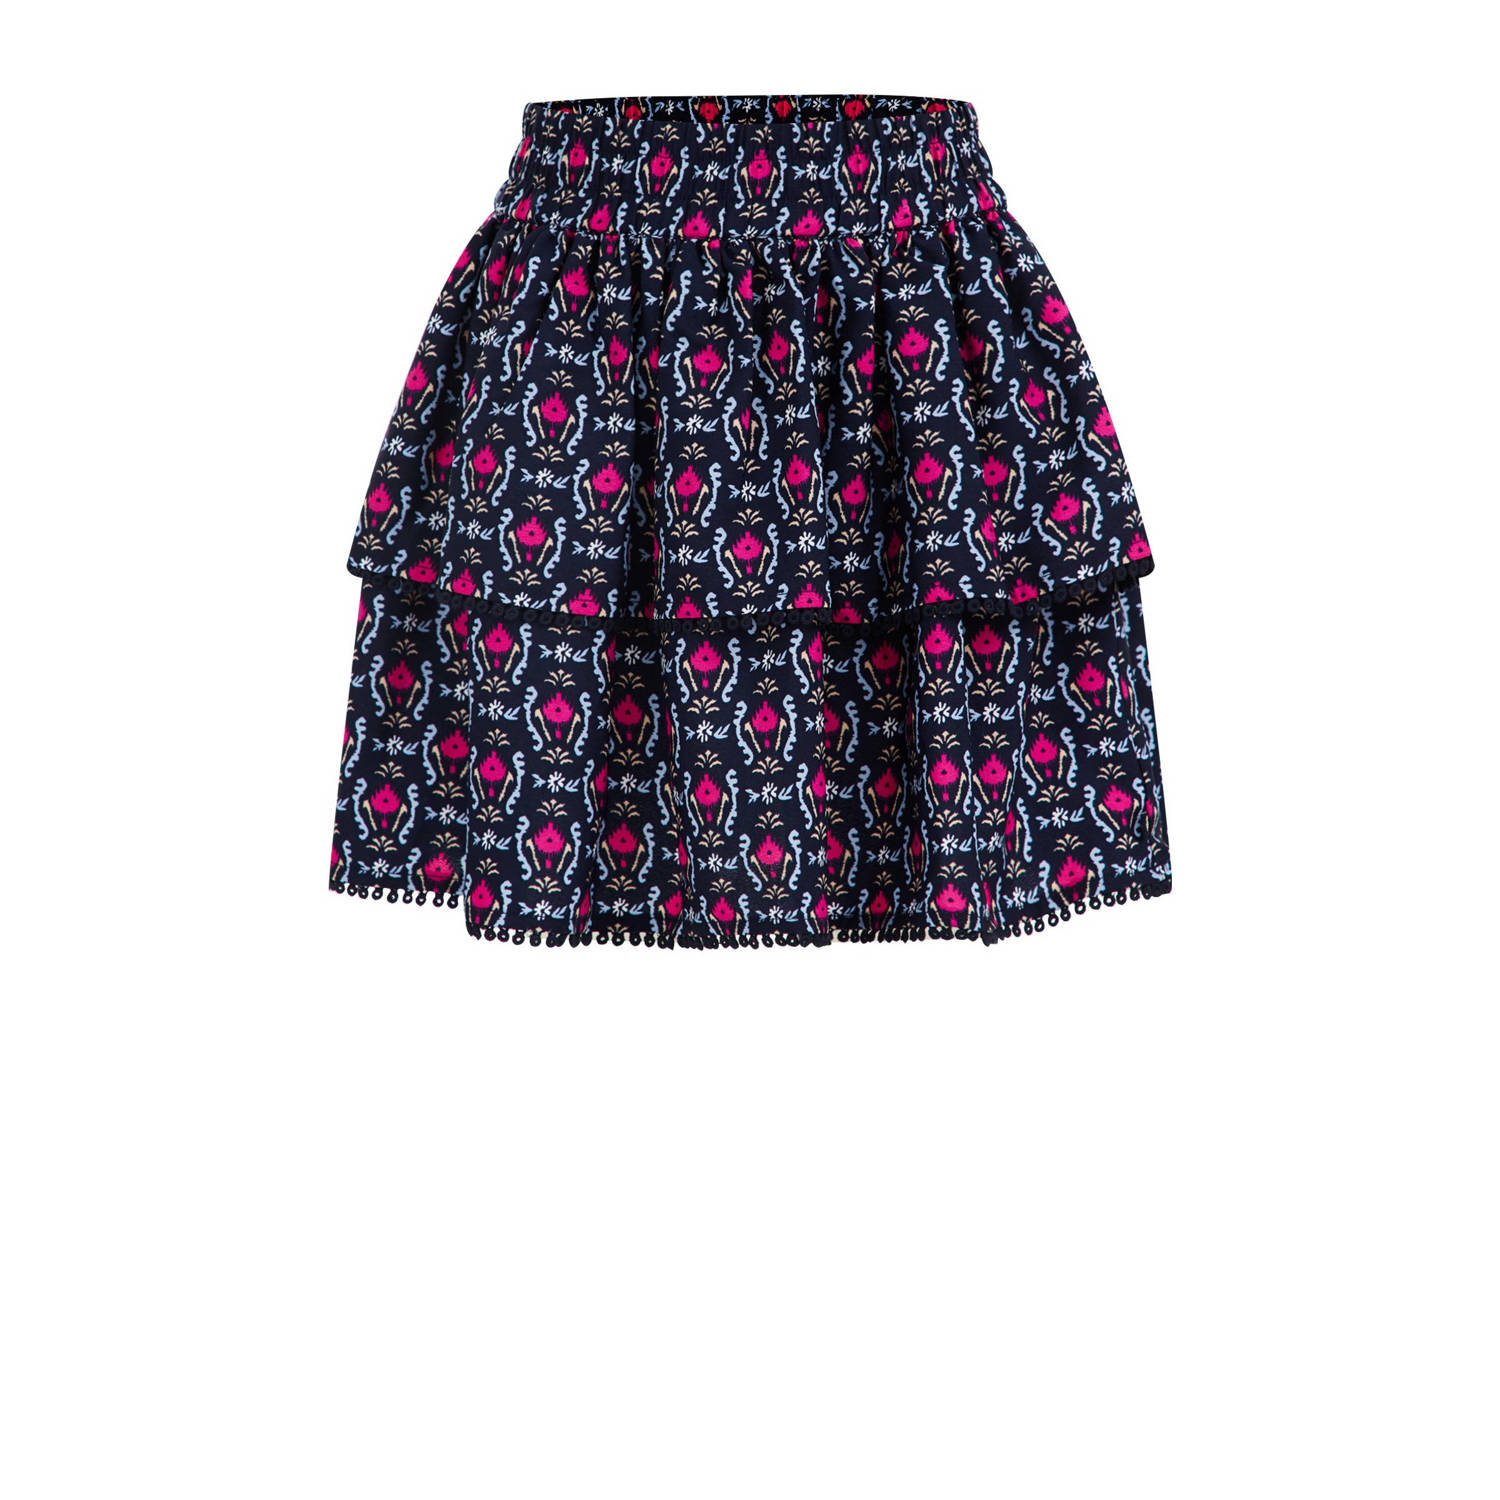 WE Fashion rok met all over print en volant donkerblauw roze lichtblauw Multi Meisjes Gerecycled polyester 92